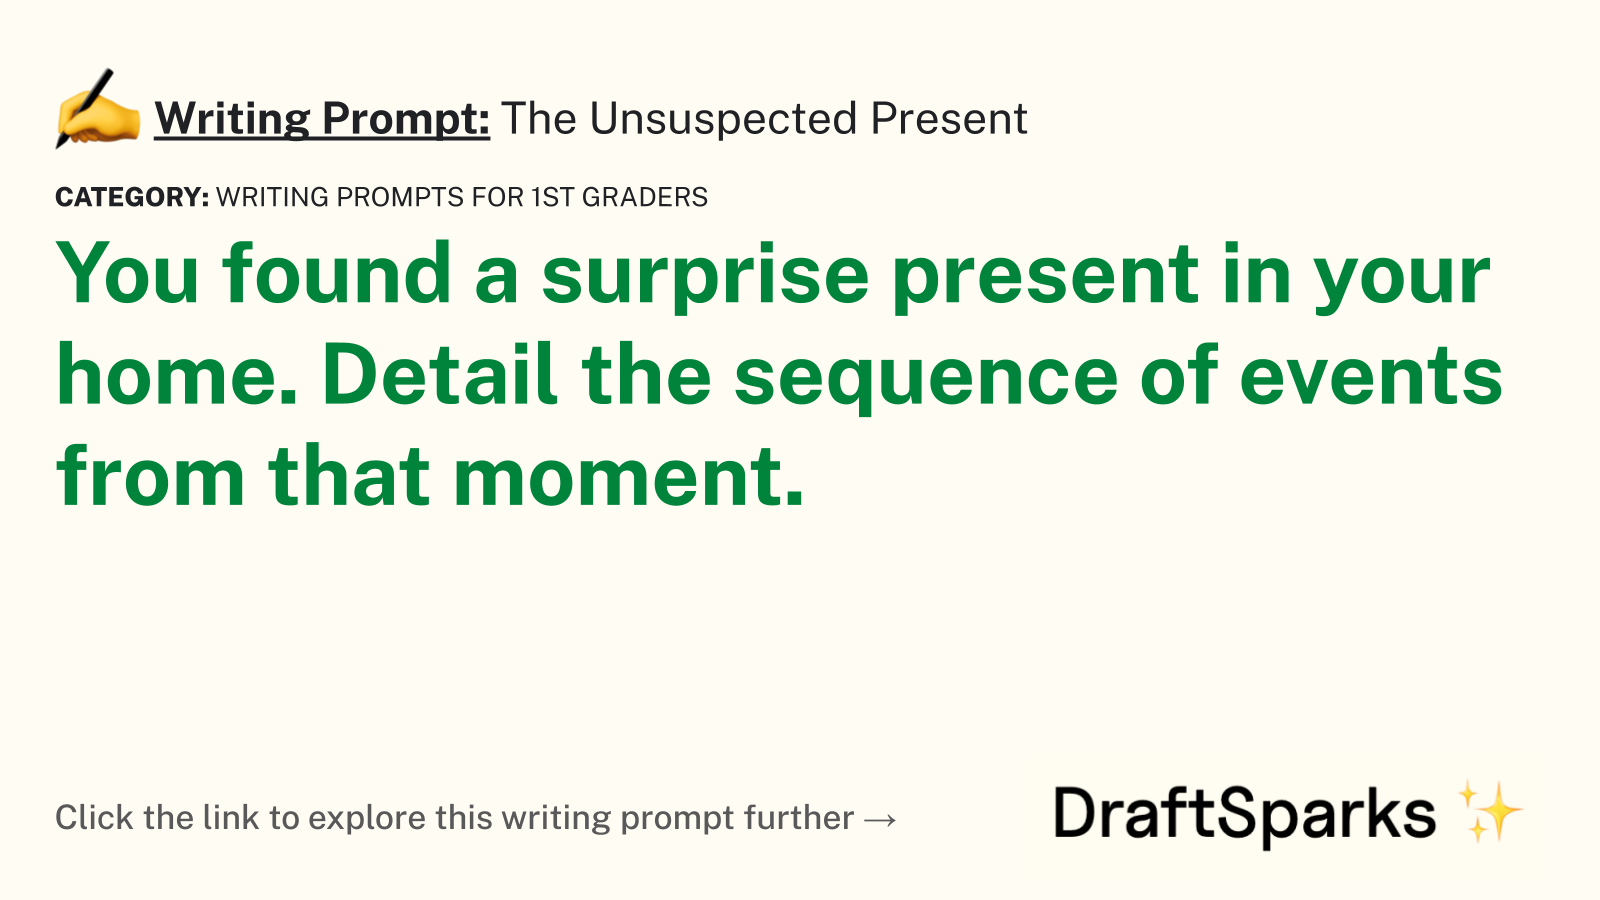 The Unsuspected Present